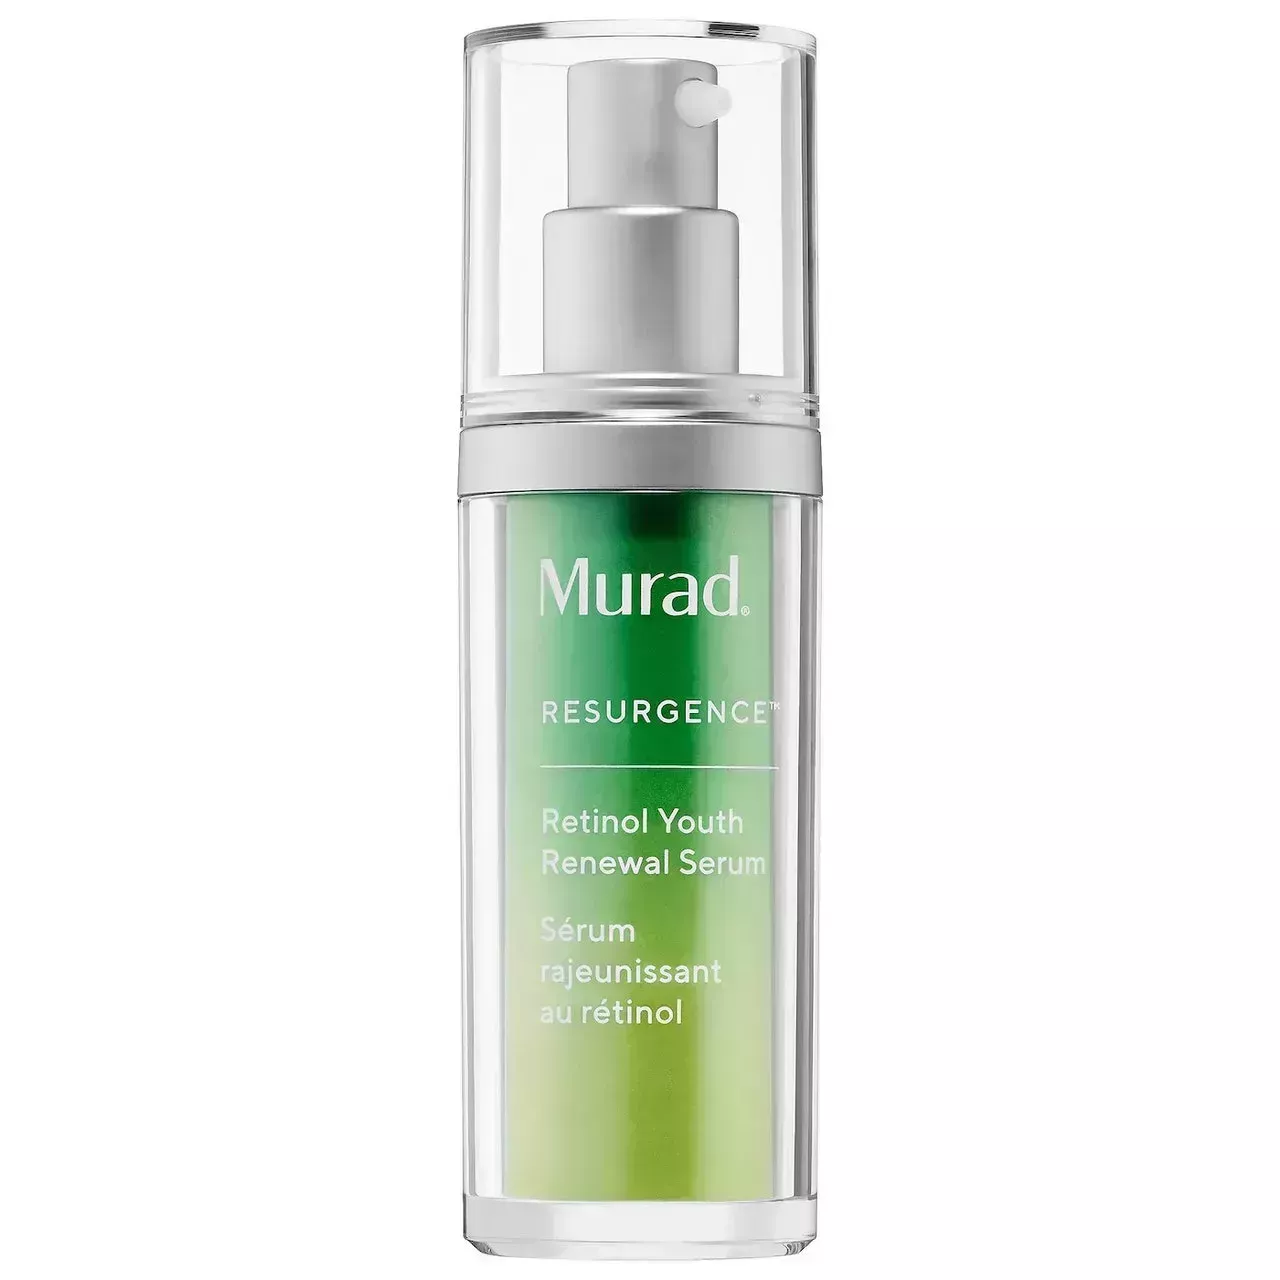 Murad Retinol Youth Renewal Serum green gradient bottle with silver pump and clear cap on white background